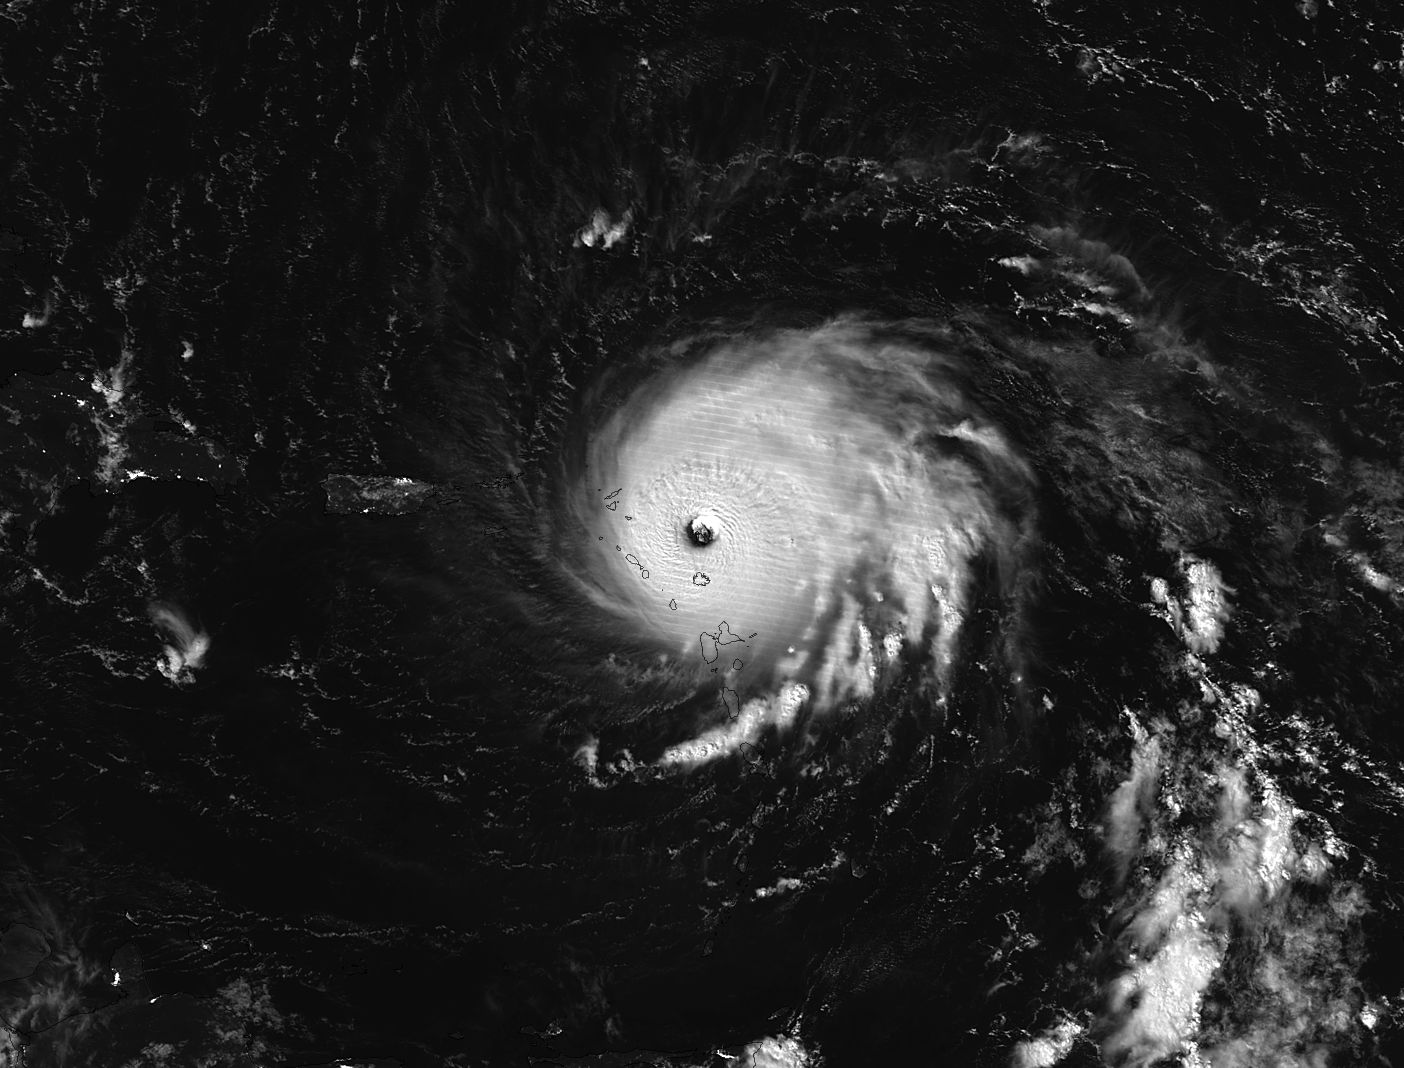 Black and white nighttime image of Irma, with the swirling white cloud mass very visible against the dark ocean.